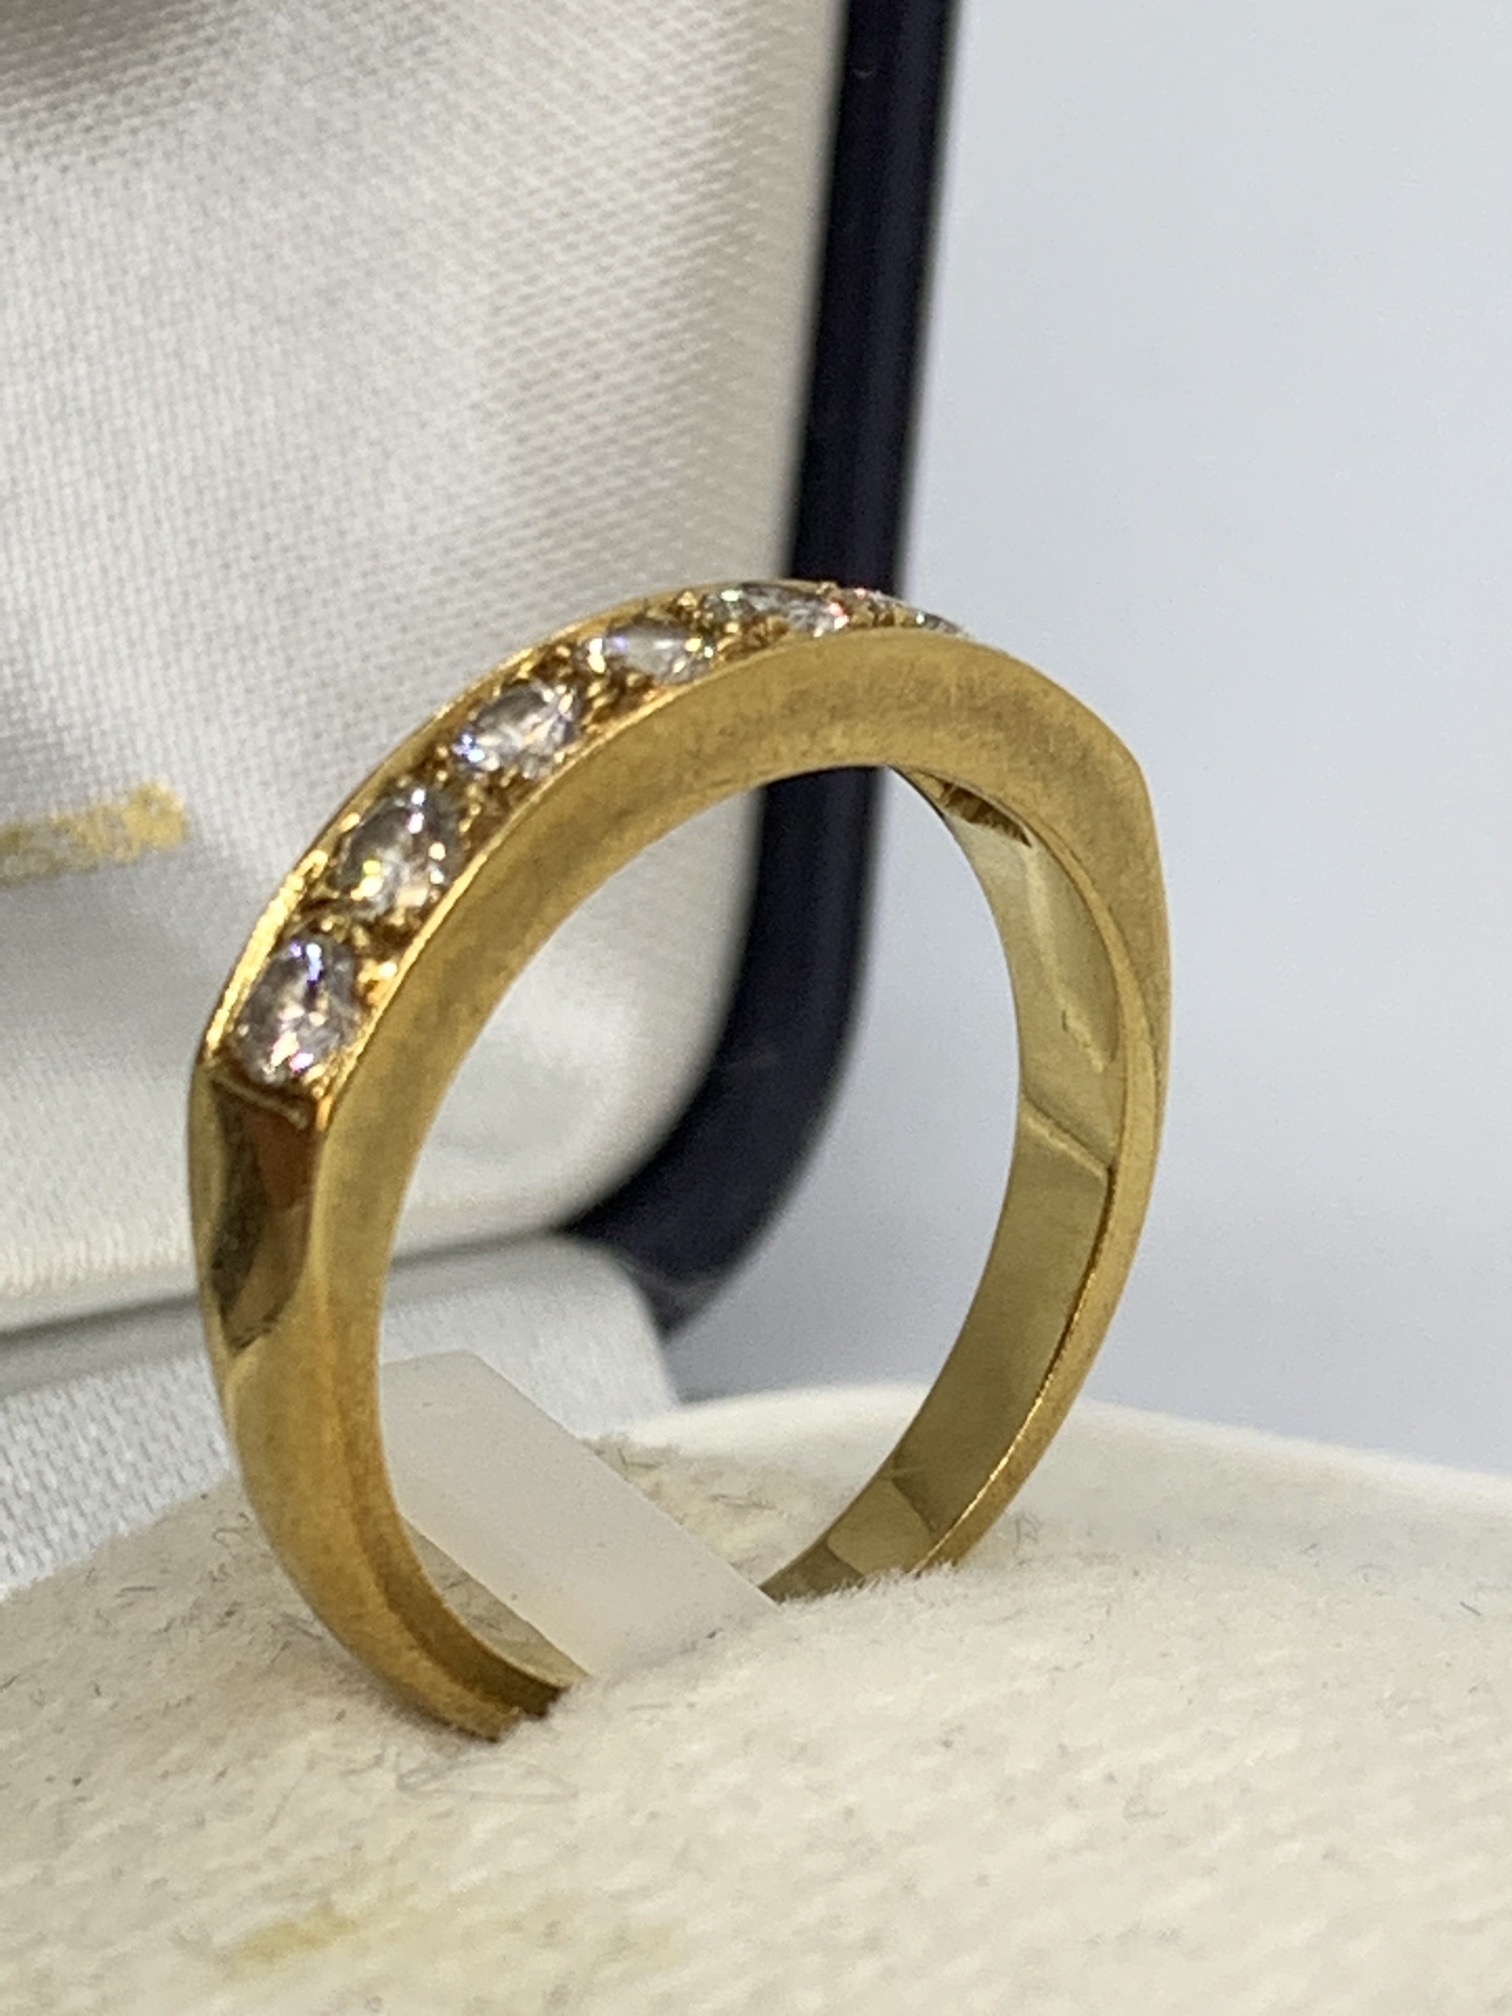 DIAMOND 1/2 ETERNITY RING IN 18ct YELLOW GOLD - 4.1g APPROX - SIZE M APPROX - Image 6 of 8